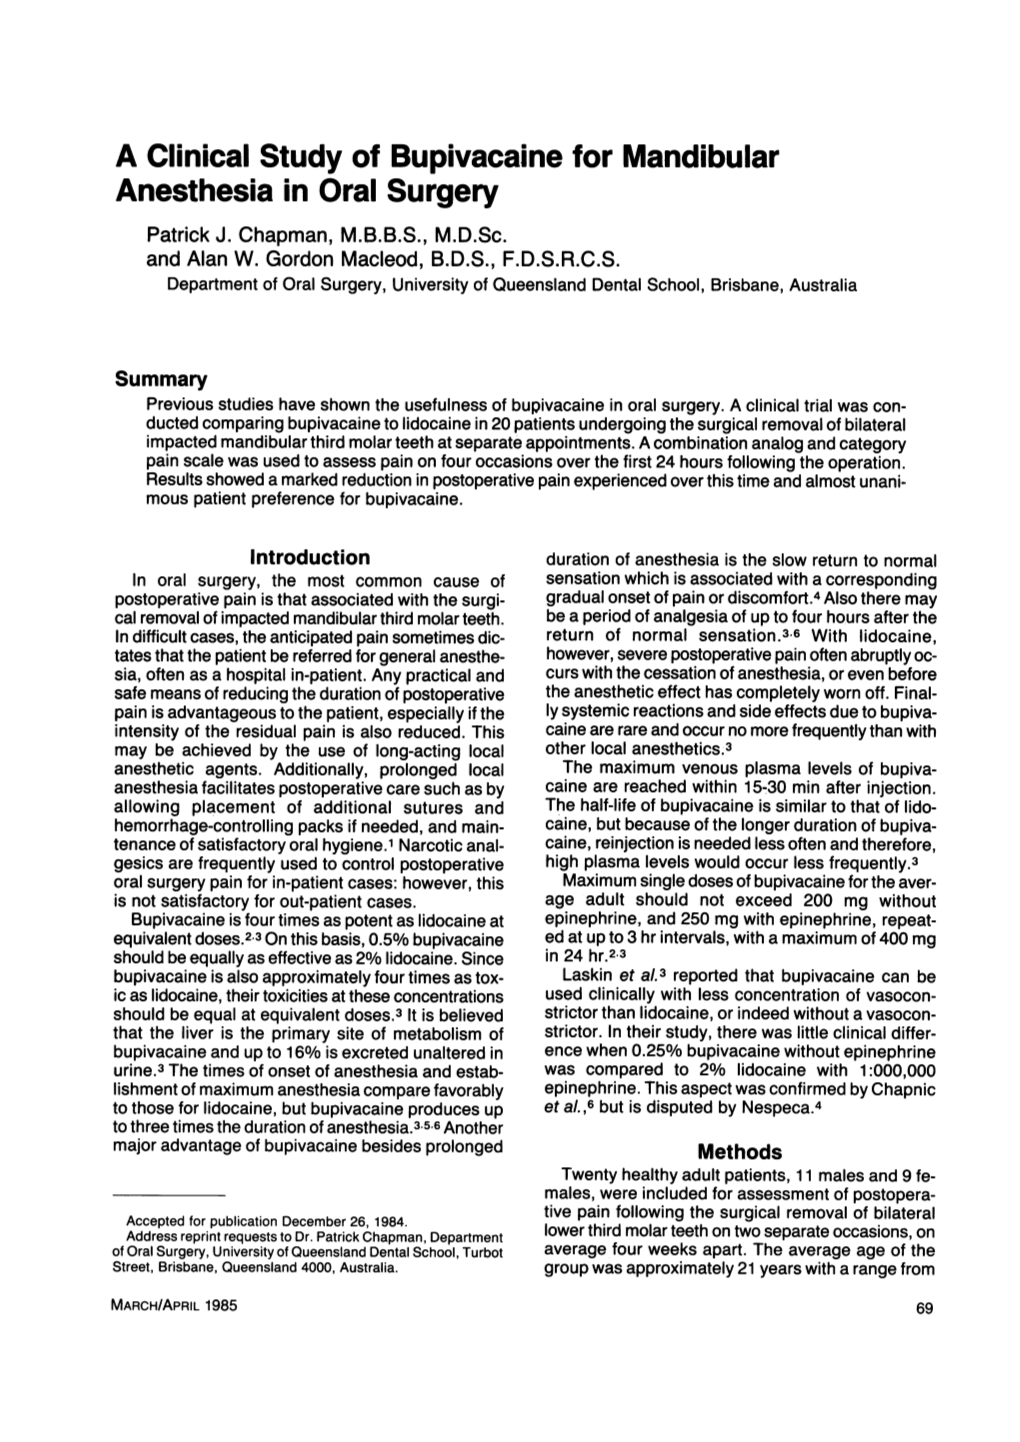 A Clinical Study of Bupivacaine for Mandibular Anesthesia in Oral Surgery Patrick J